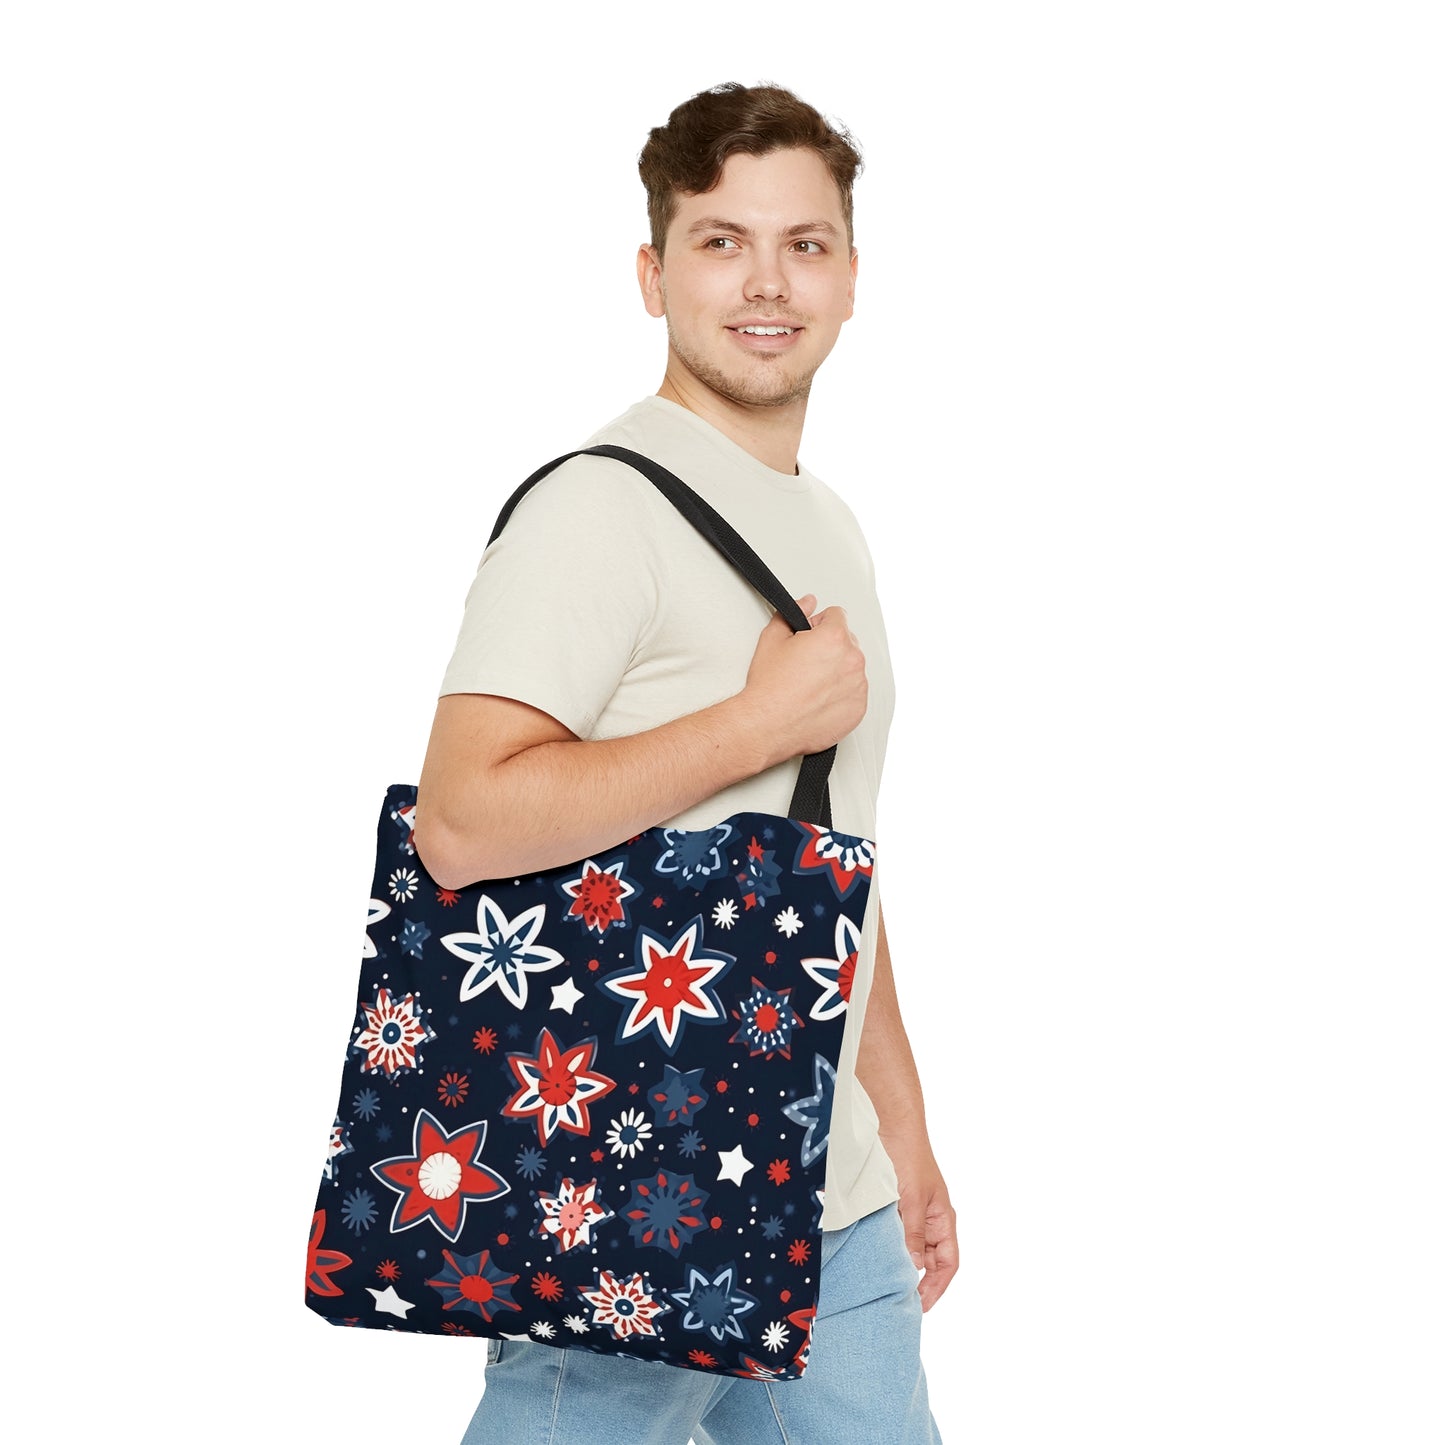 Patriotic Flowers Tote Bag, Red White Blue Canvas Tote Bag, Fourth of July Shopping Bag, Reusable Tote, Summer Tote, Fireworks